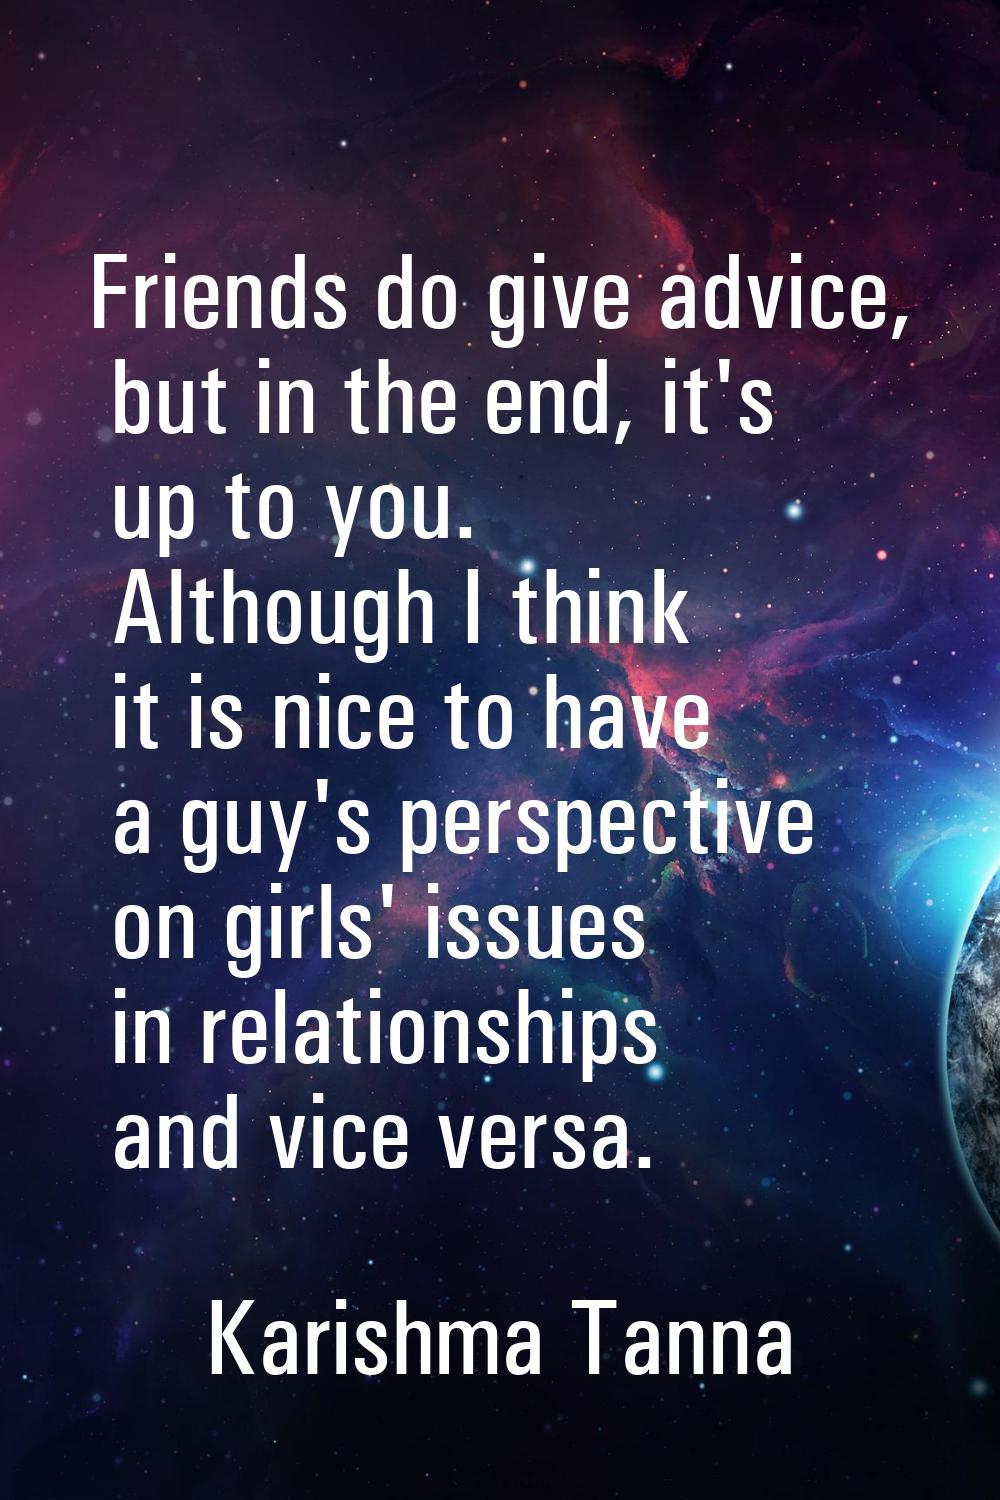 Friends do give advice, but in the end, it's up to you. Although I think it is nice to have a guy's